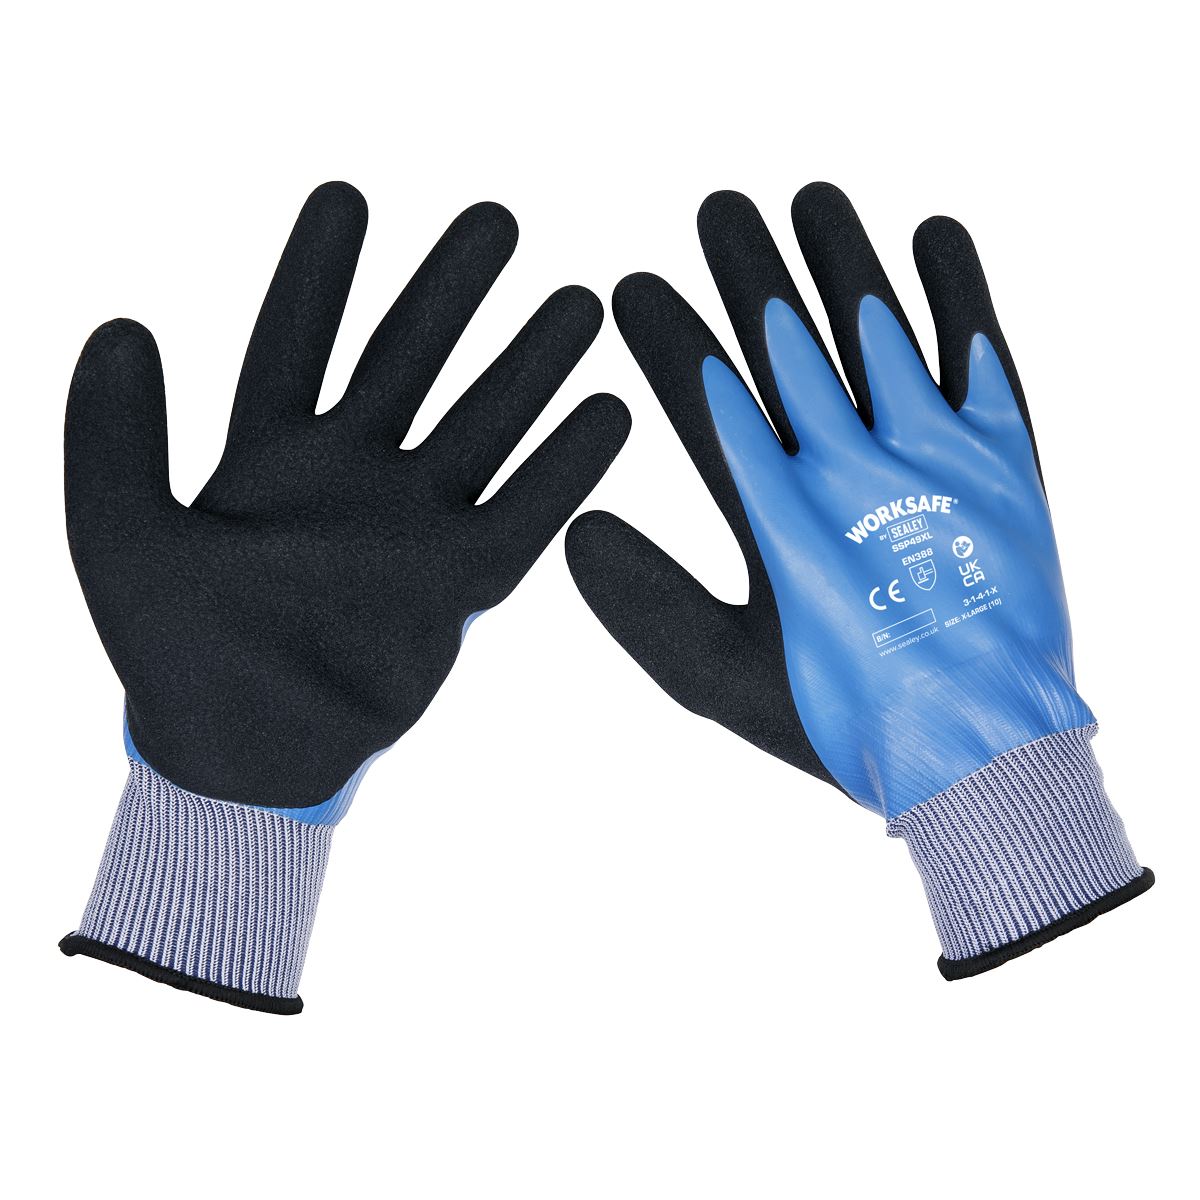 Worksafe by Sealey Waterproof Latex Gloves - (X-Large) - Box of 120 Pairs